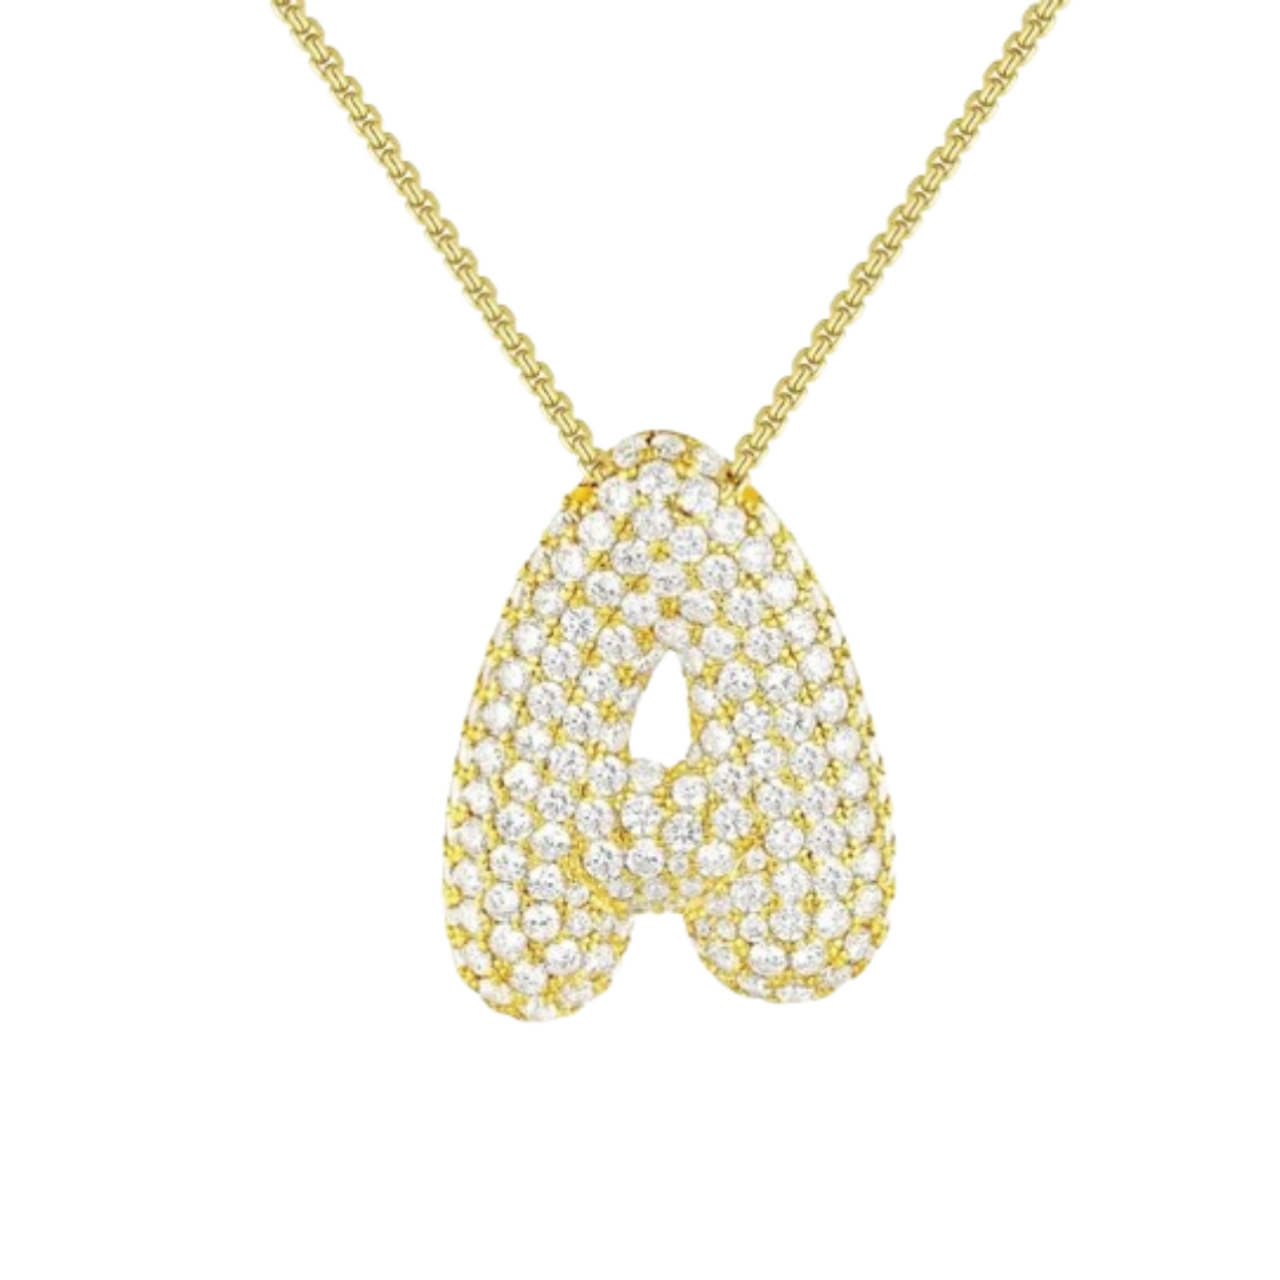 Triple AAA Cubic Zirconia Initial Necklace with Gold Plating product image